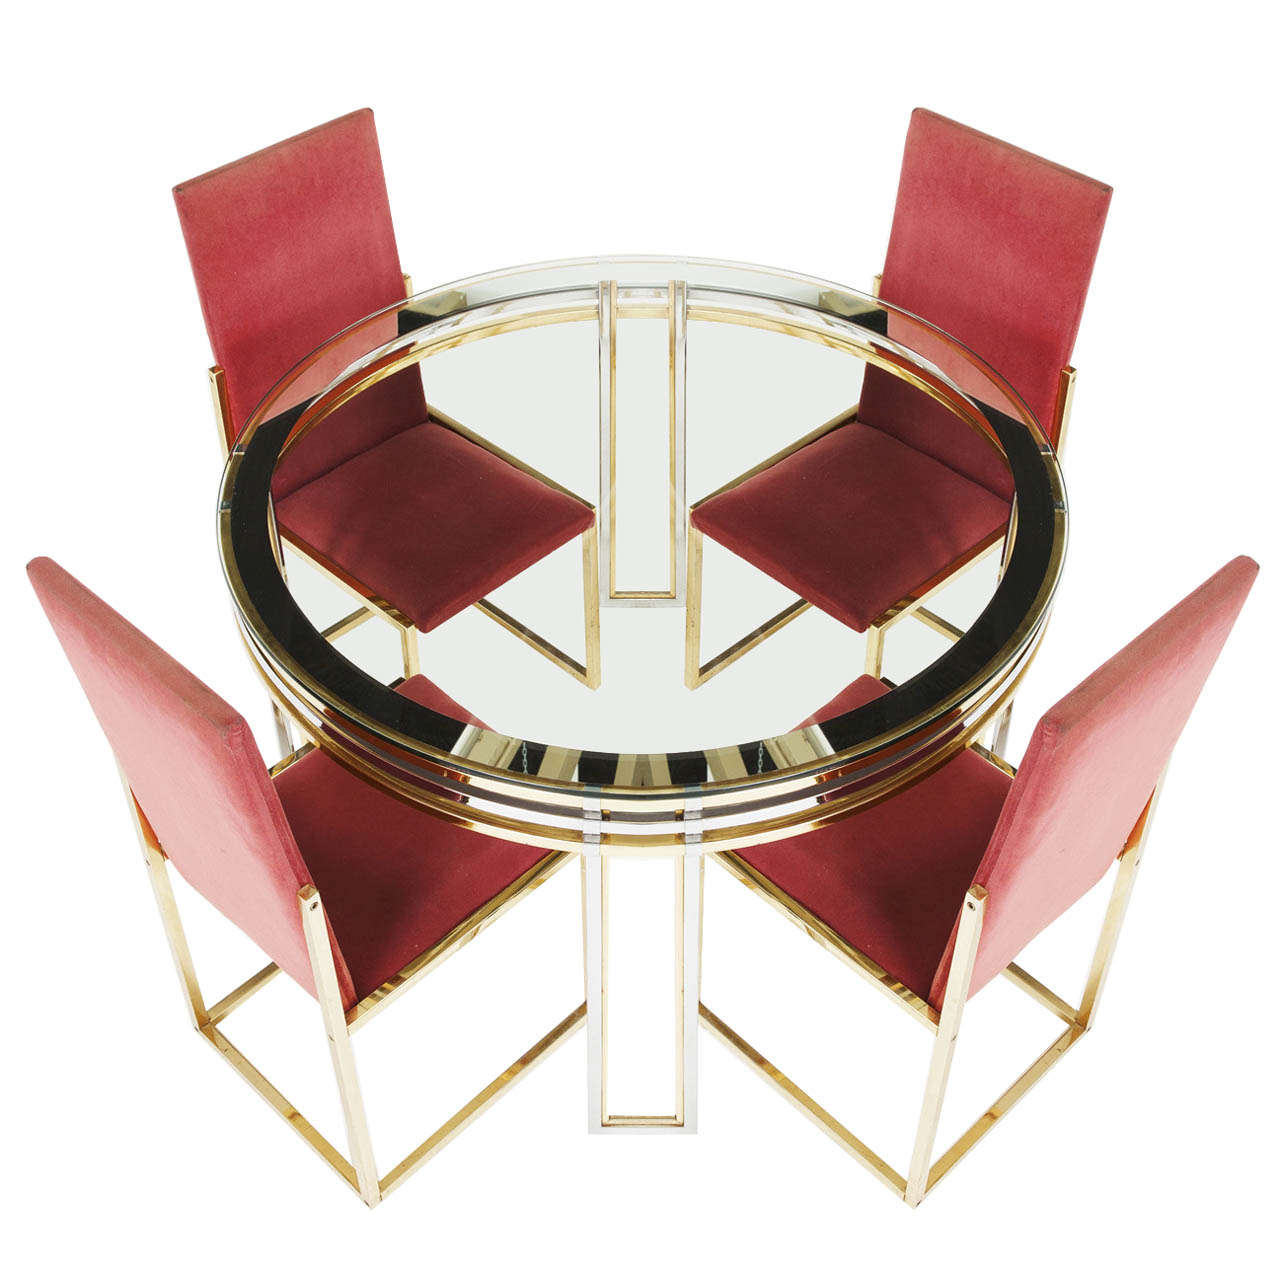 Romeo Rega Centre Table and Chairs in Chrome and Brass